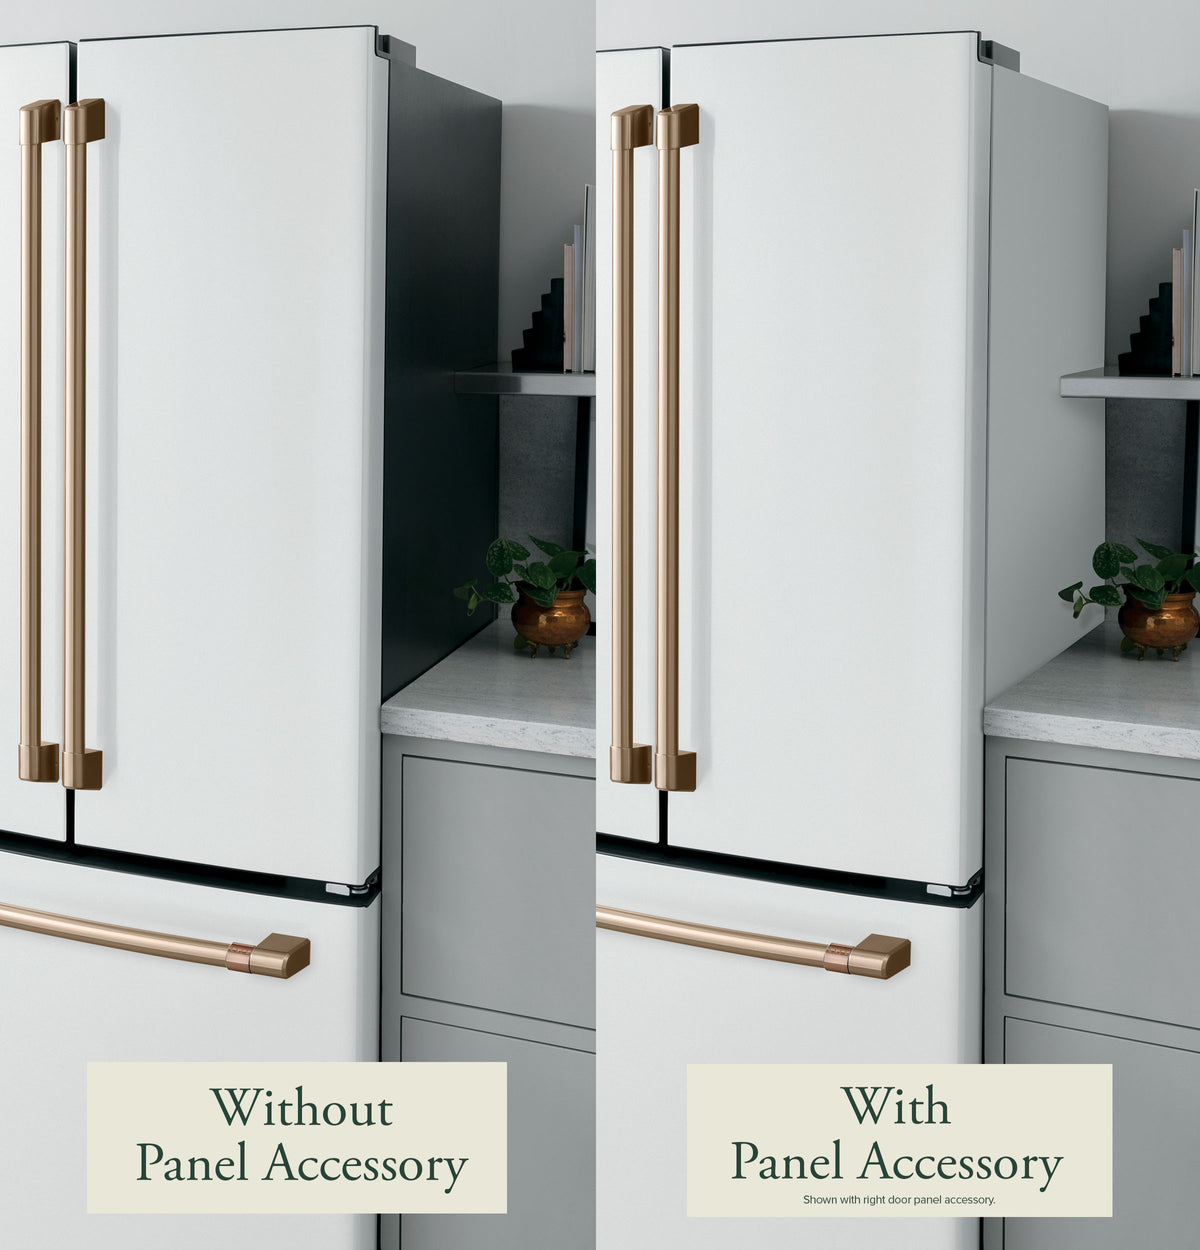 GE Refrigerator with Hot Water Dispenser